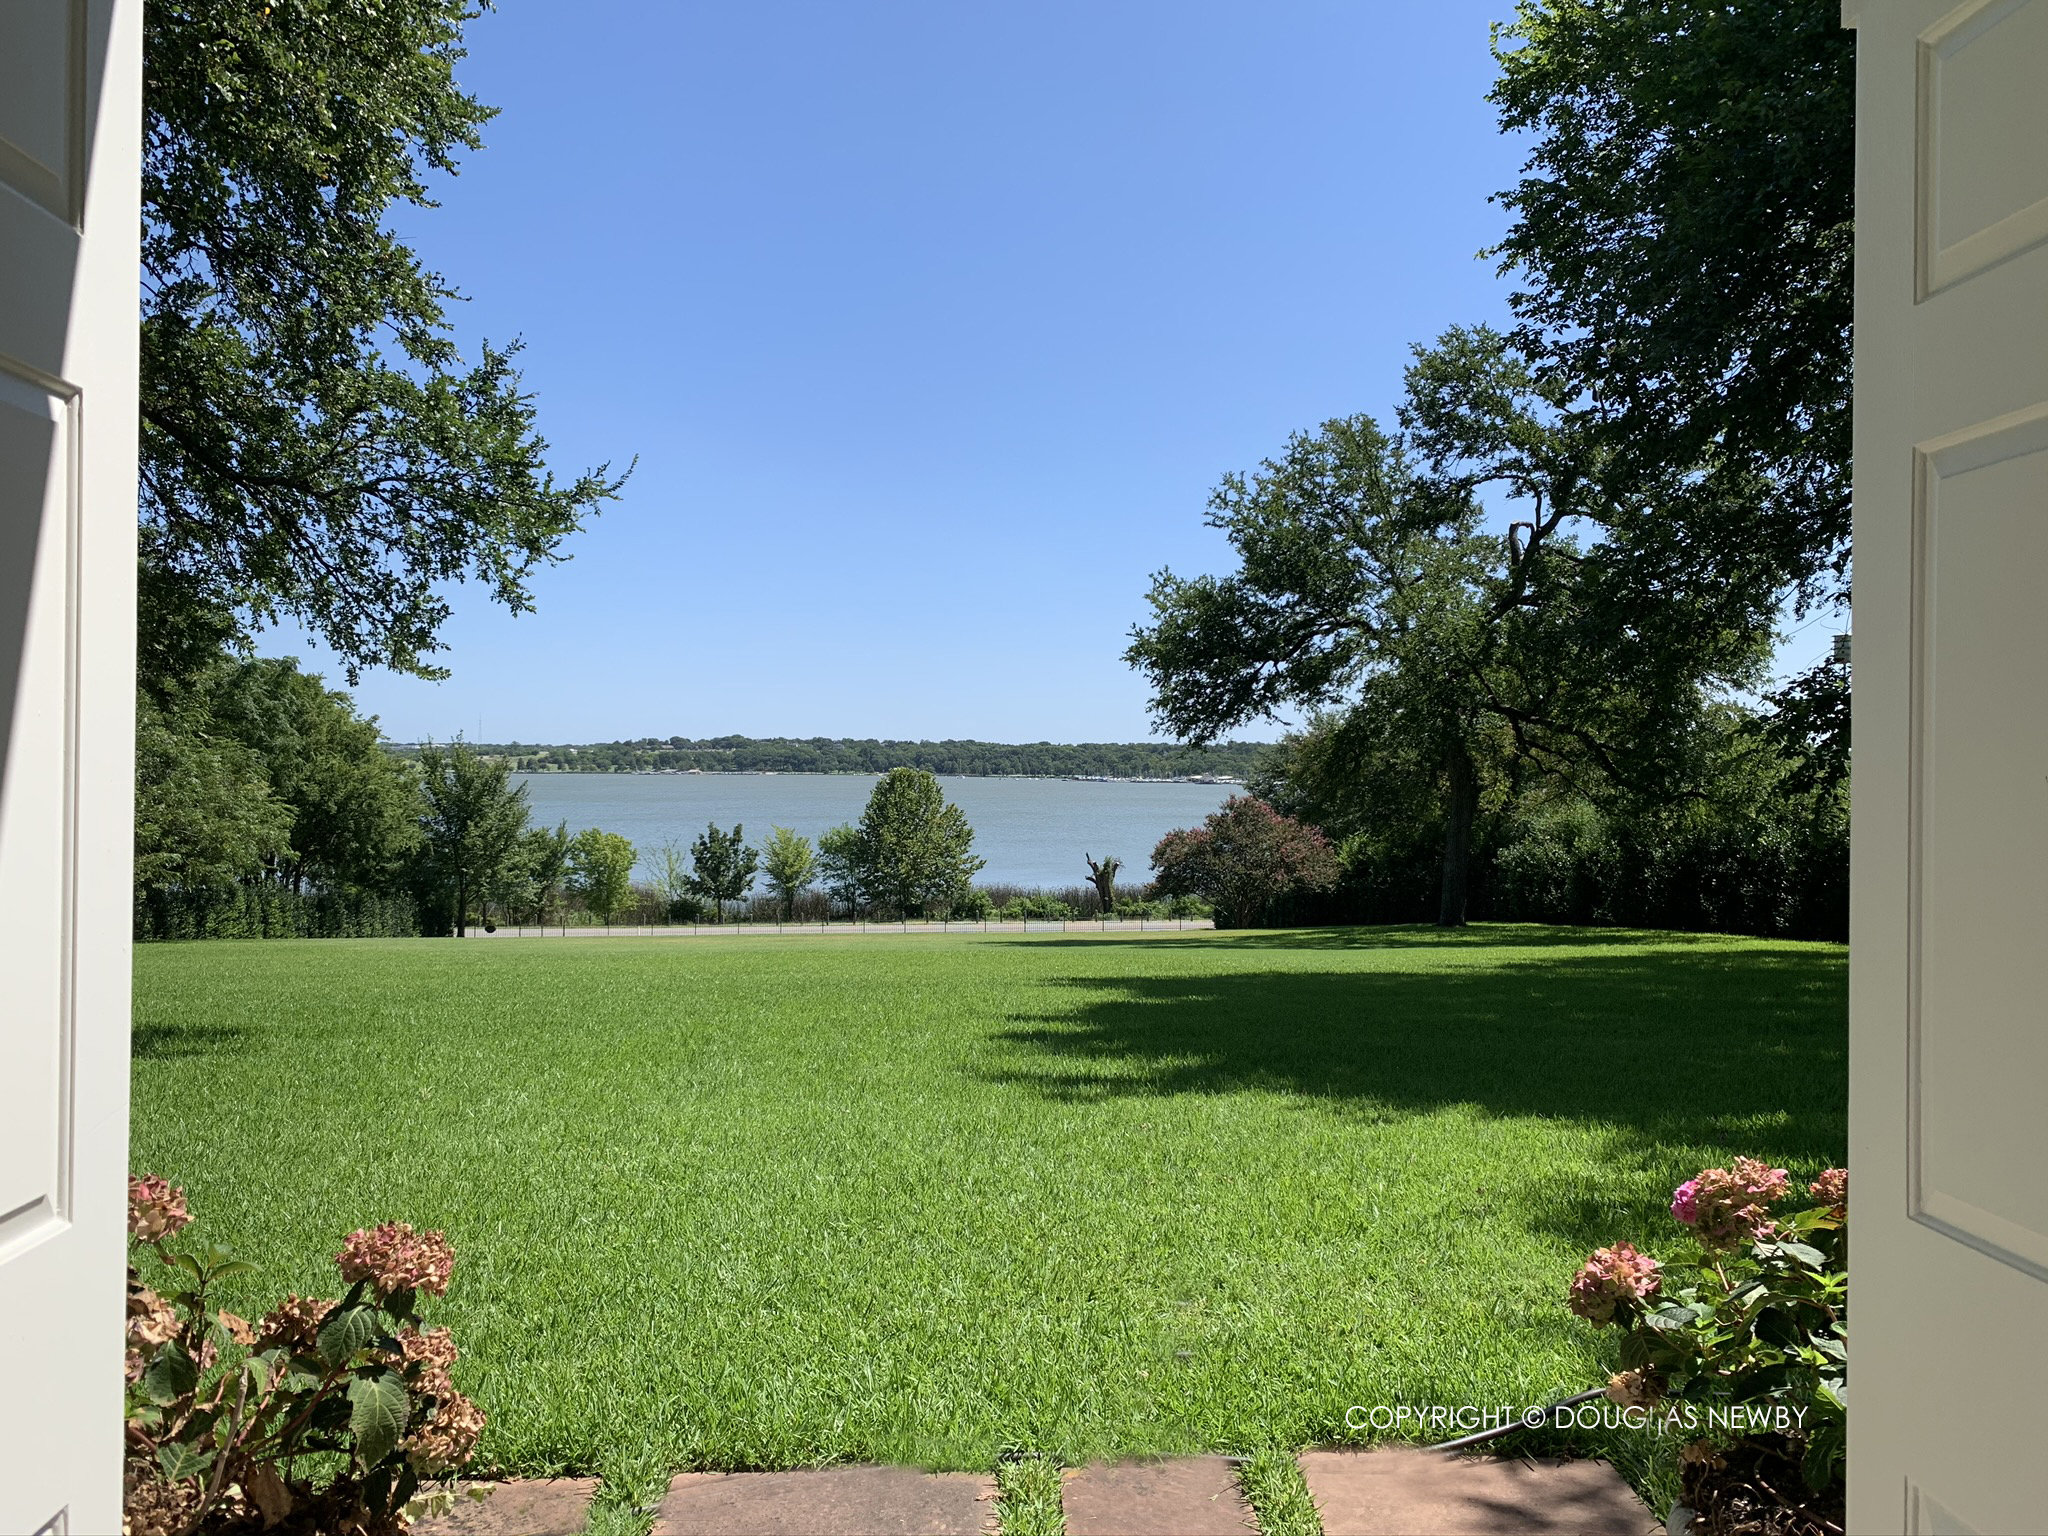 White Rock Lake from front door of home.